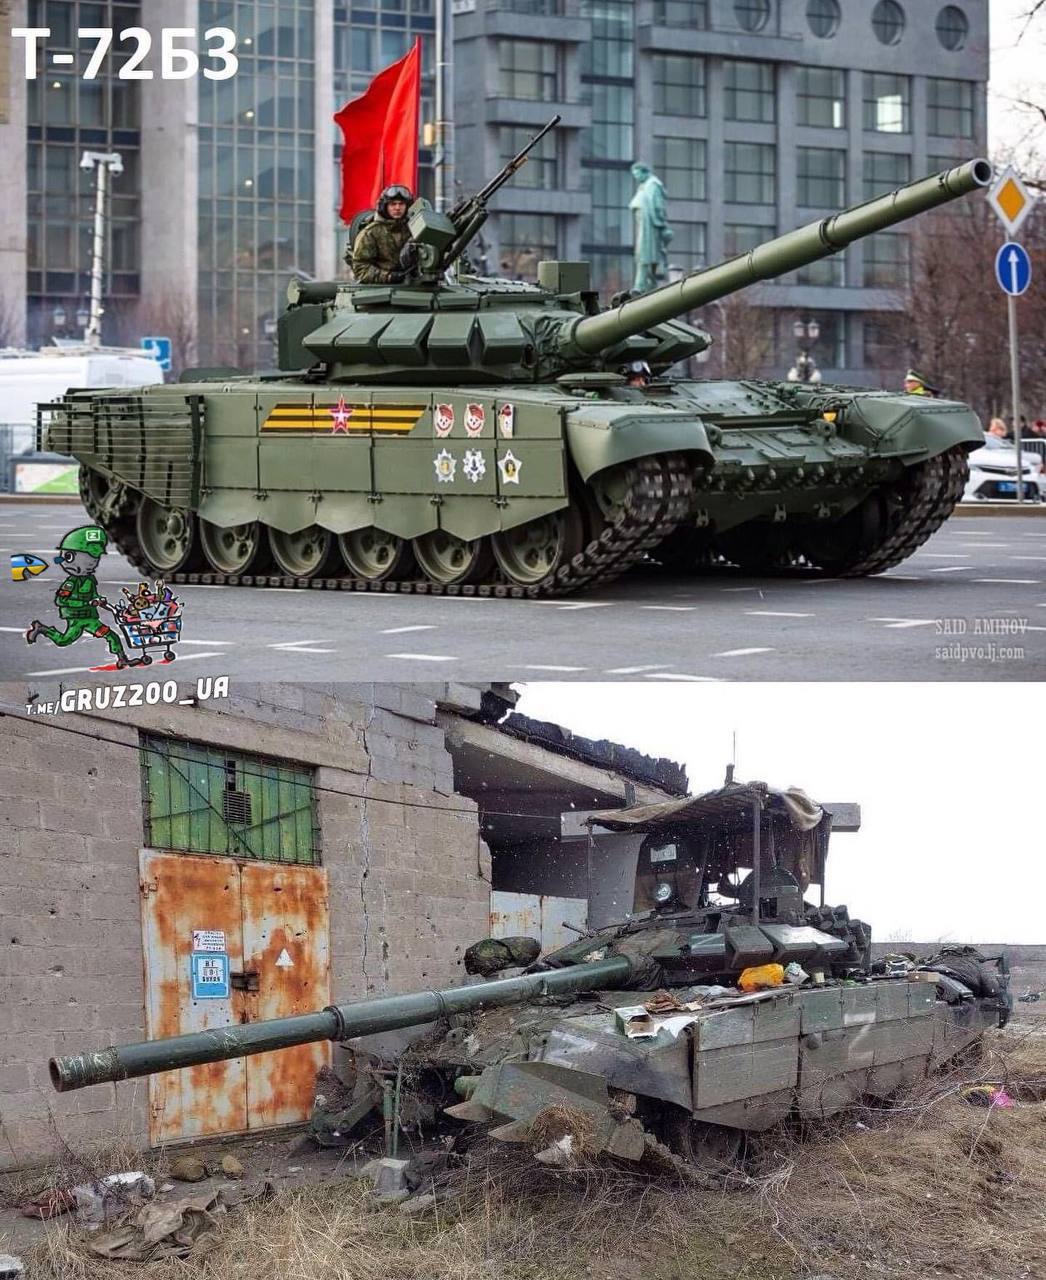 Russia’s Latest Heavy Armor Before and After Coming to Ukraine (Photo Compilation), Defense Express, war in Ukraine, Russian-Ukrainian war